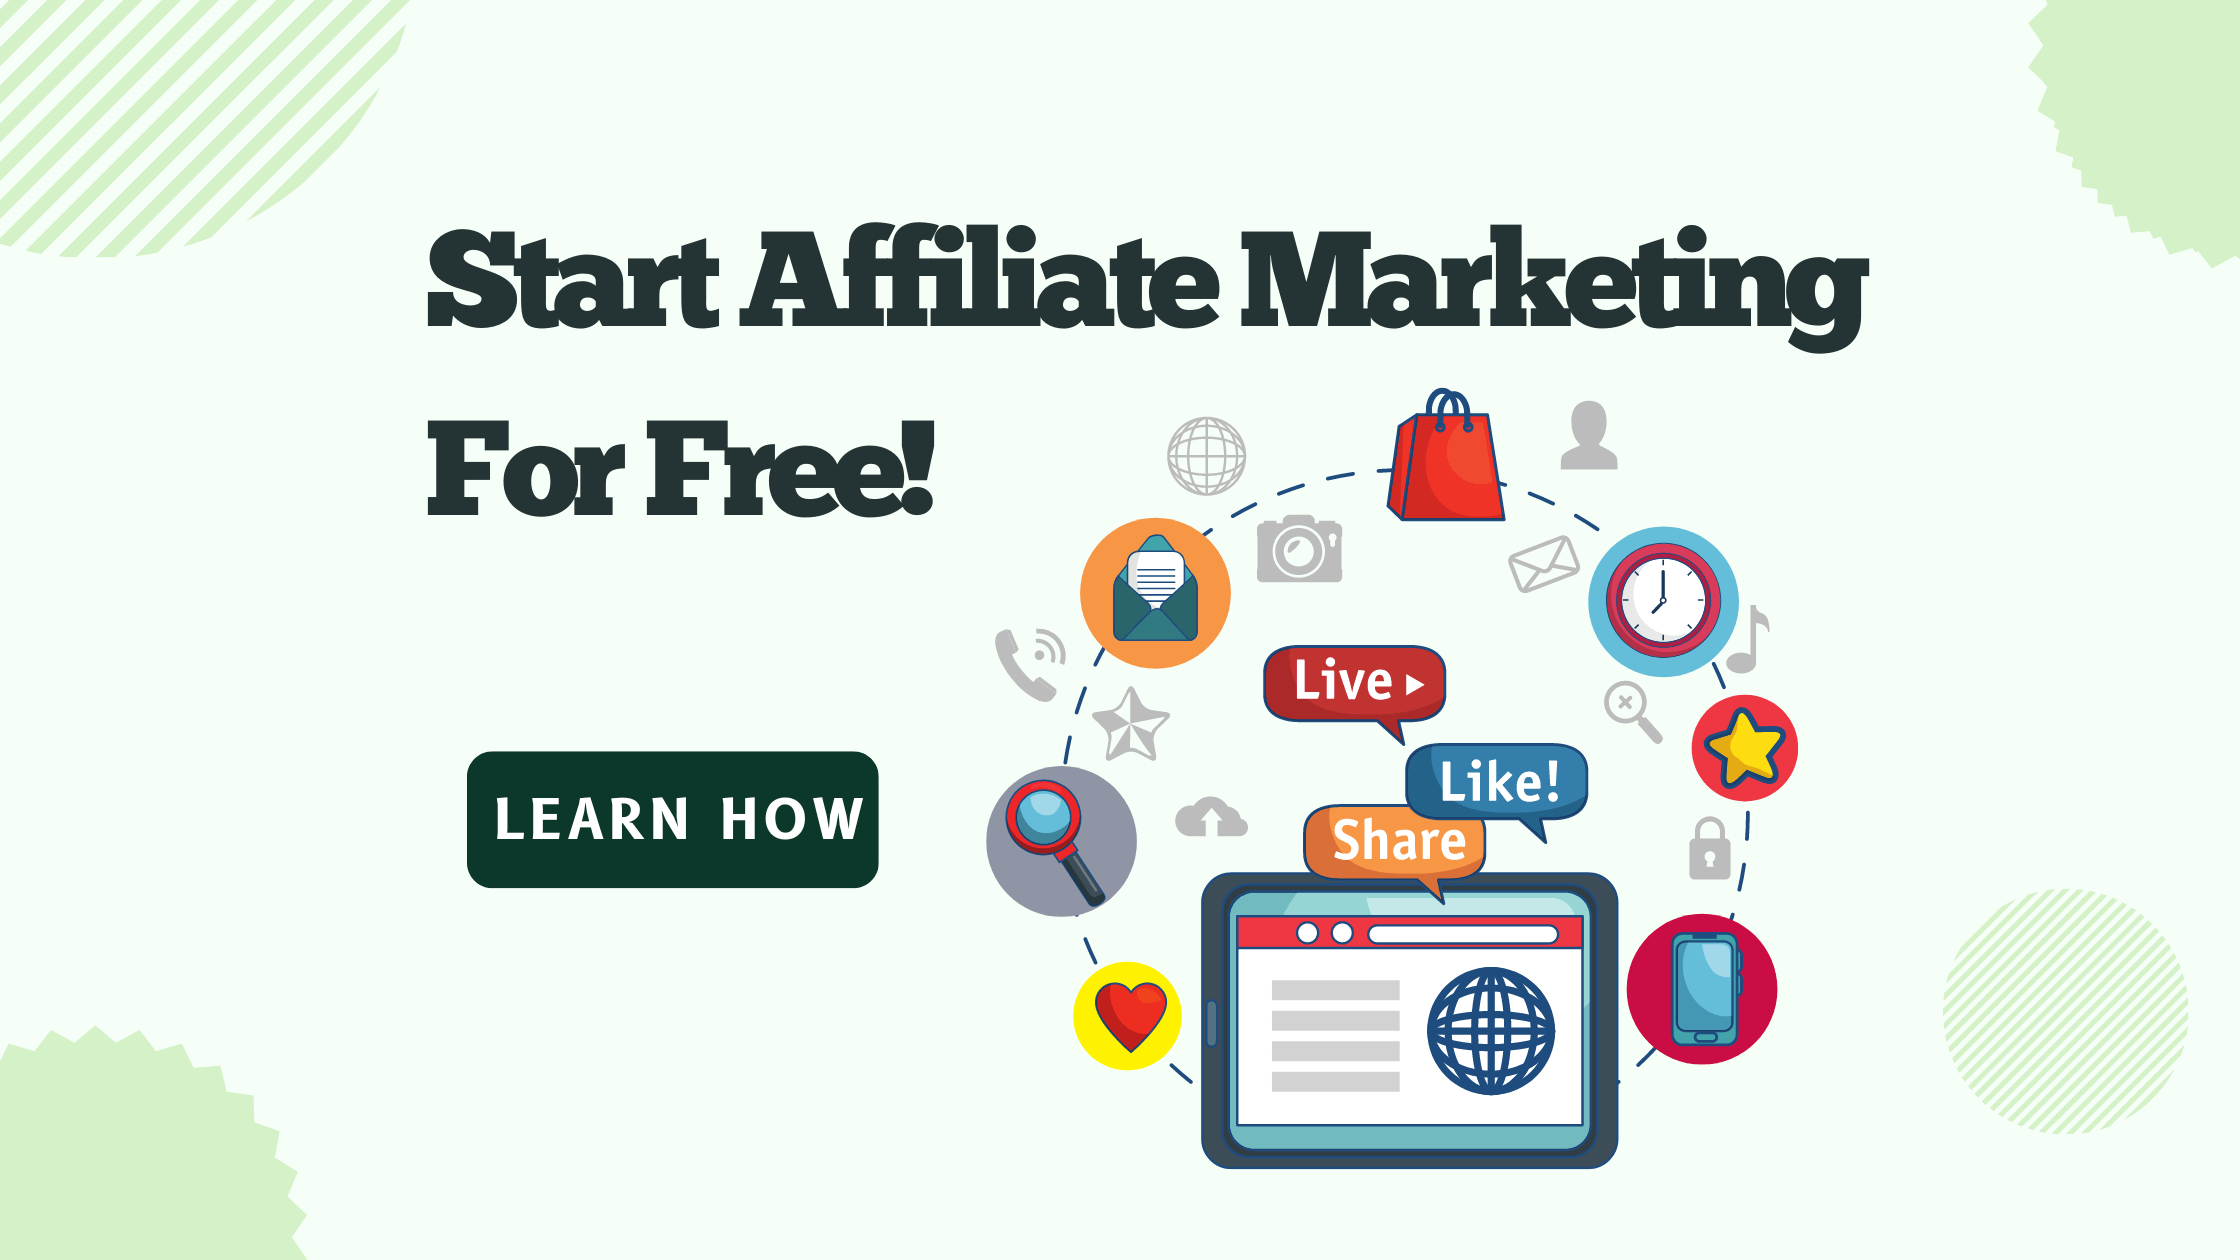 How To Start Affiliate Marketing For Free